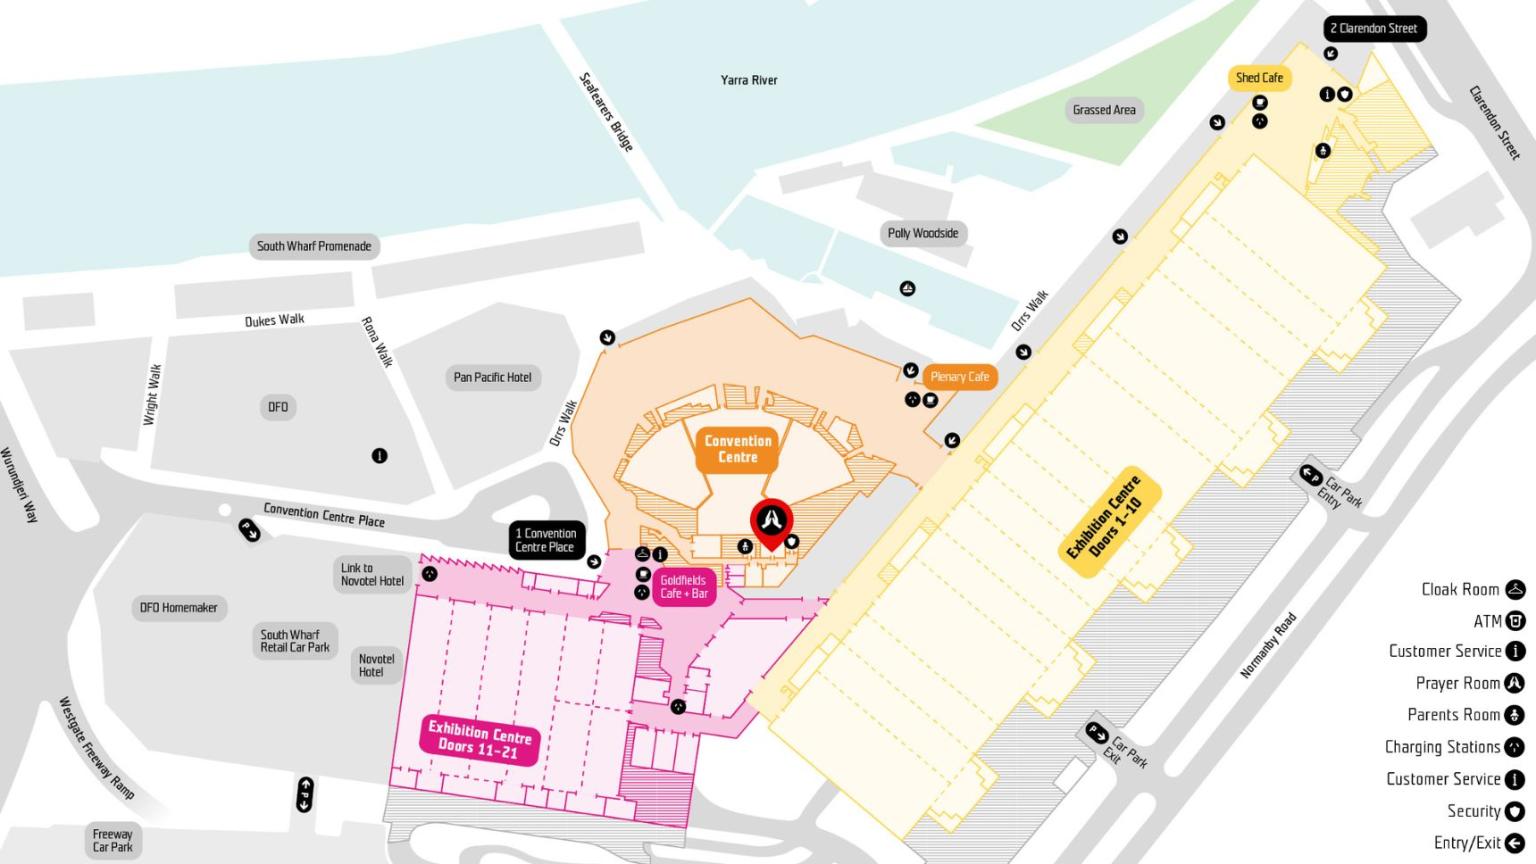 Floor plan of MCEC with a pin point highlighting the location of the prayer room.